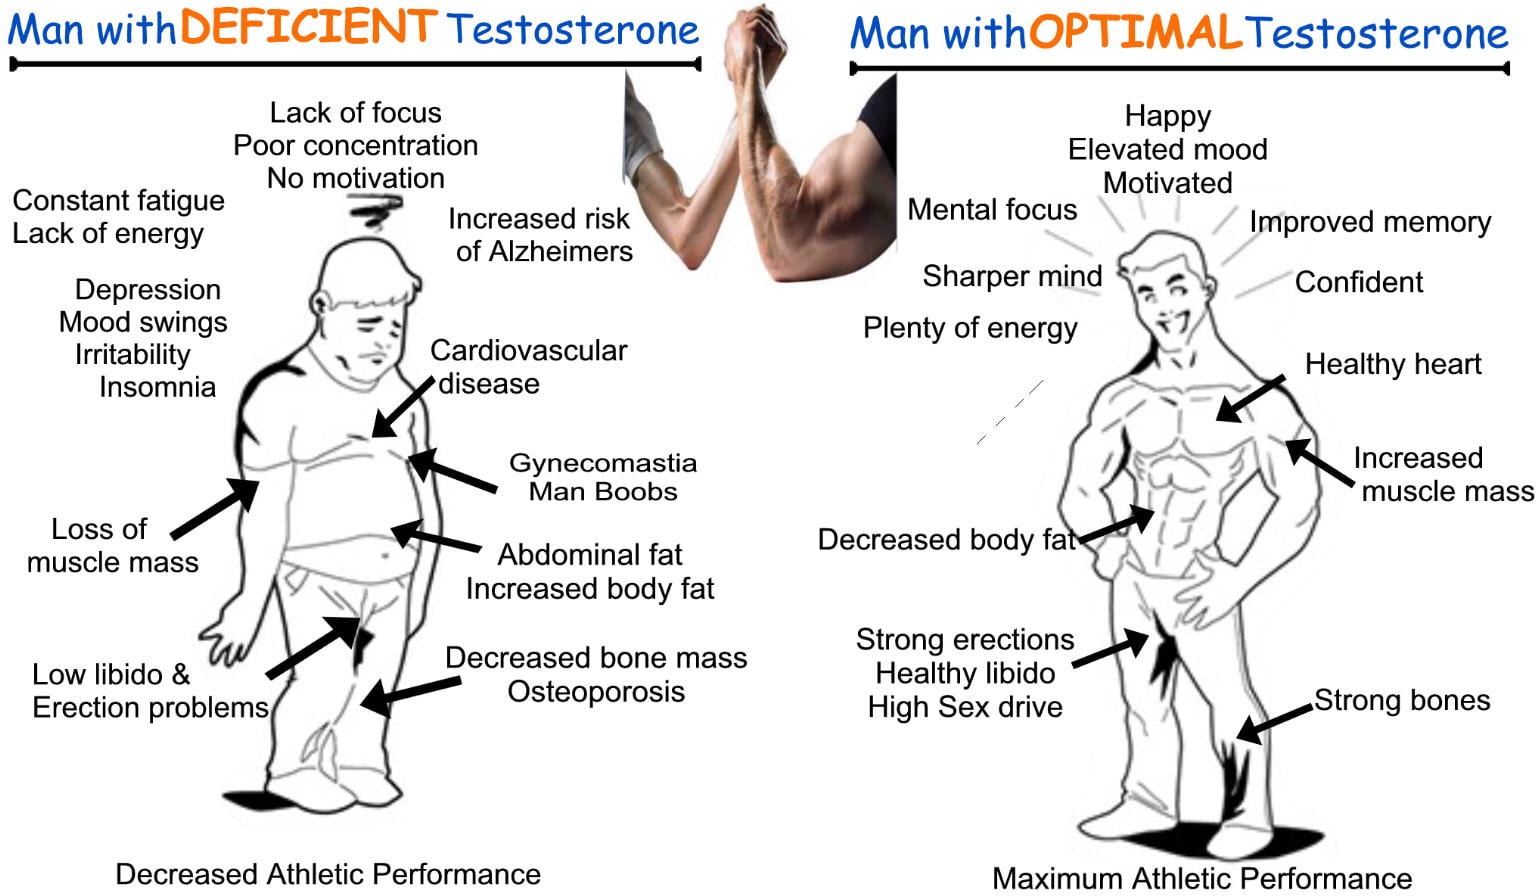 You must have been aware of the fact that testosterone is a powerful hormon...